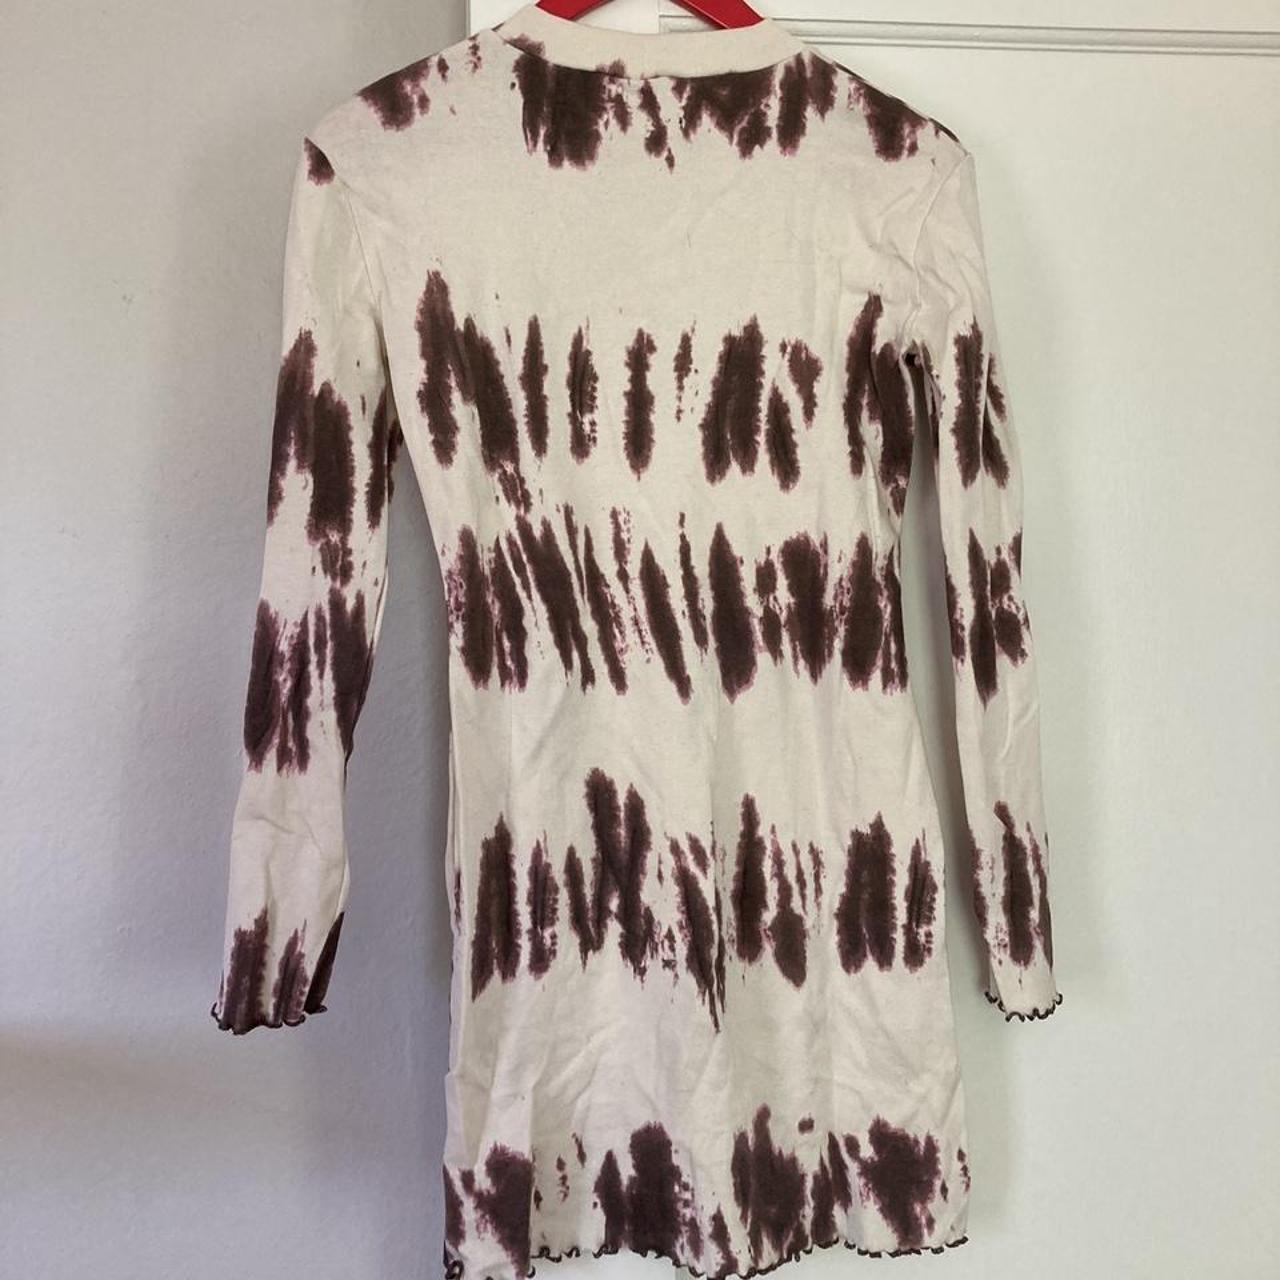 Product Image 2 - Tie-dye dress, reminiscent of Eckhaus